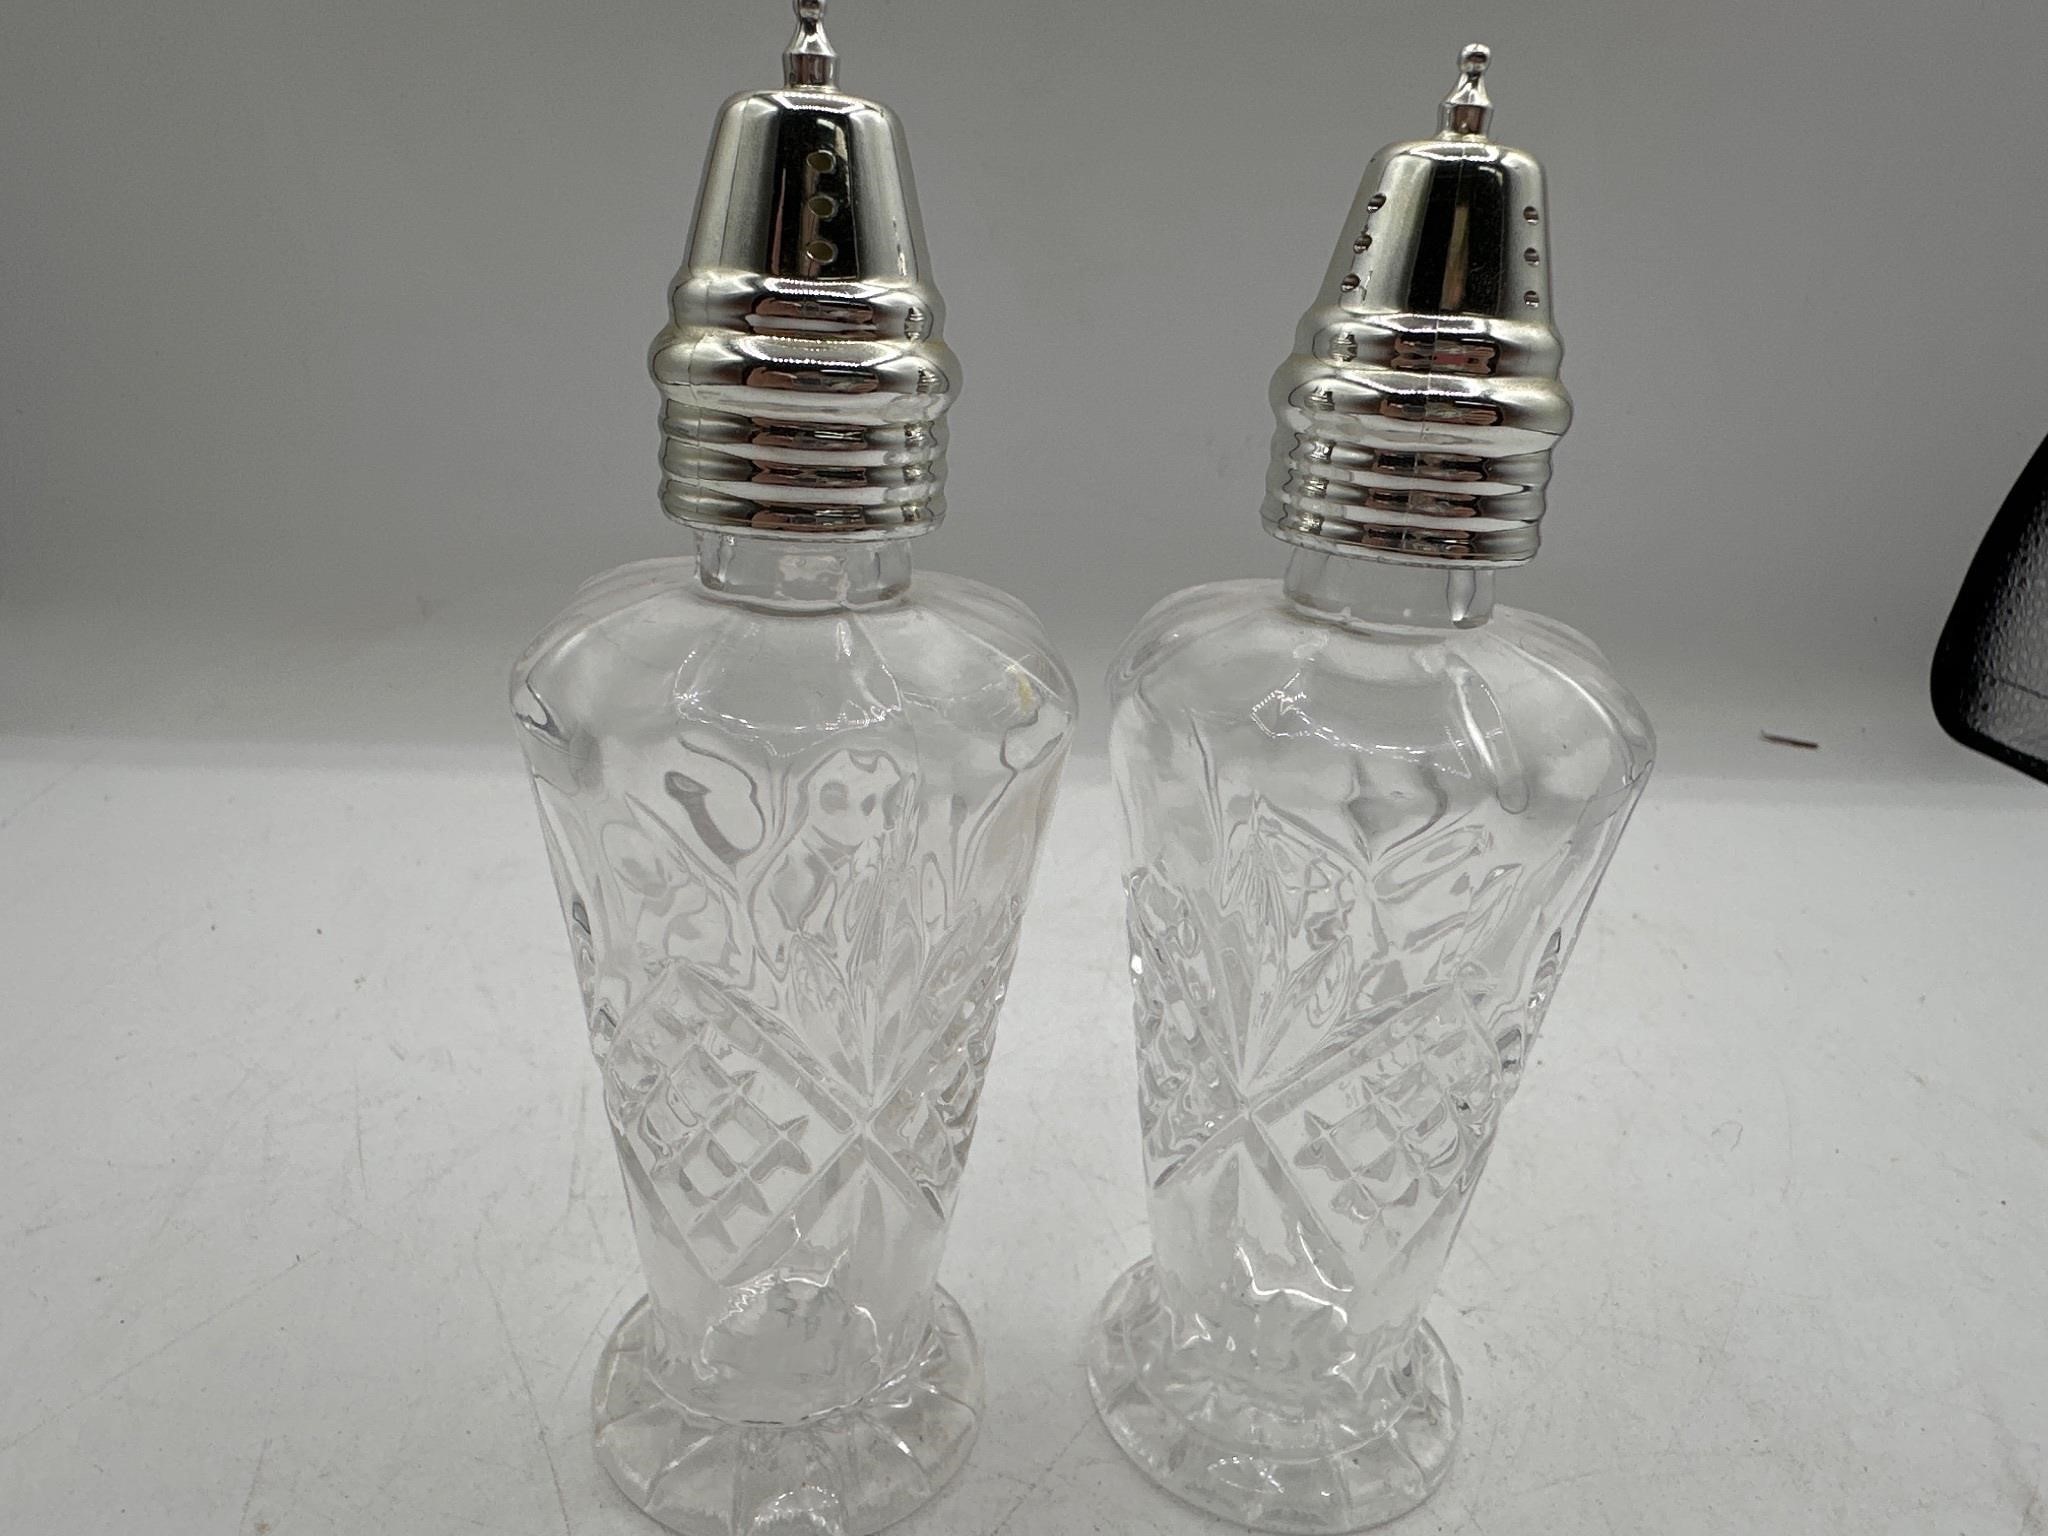 Glass salt and pepper shakers